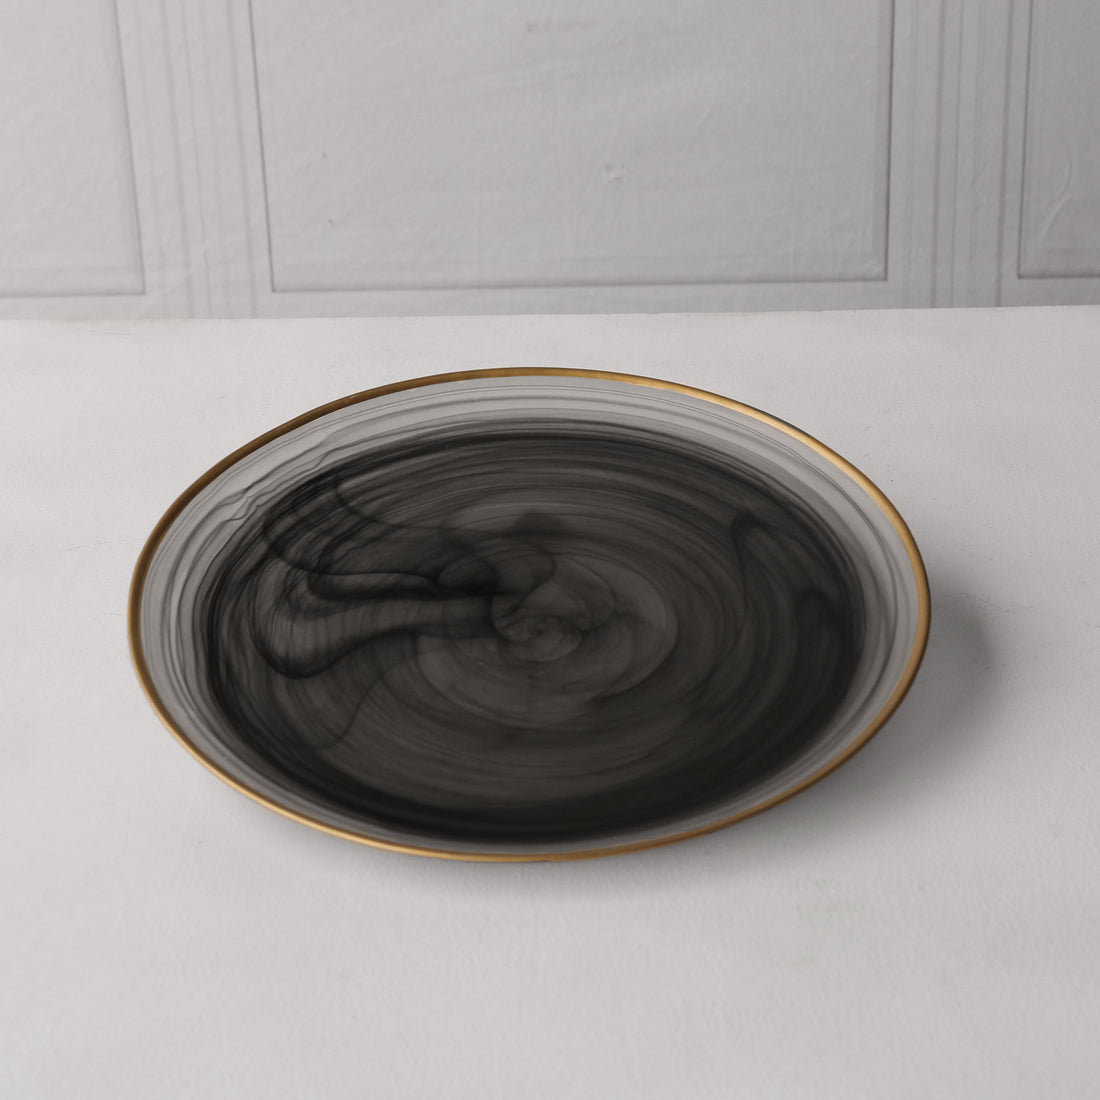 GLASS Frosted Black Alabaster Charger Plate with Gold Rim (Black and Gold)